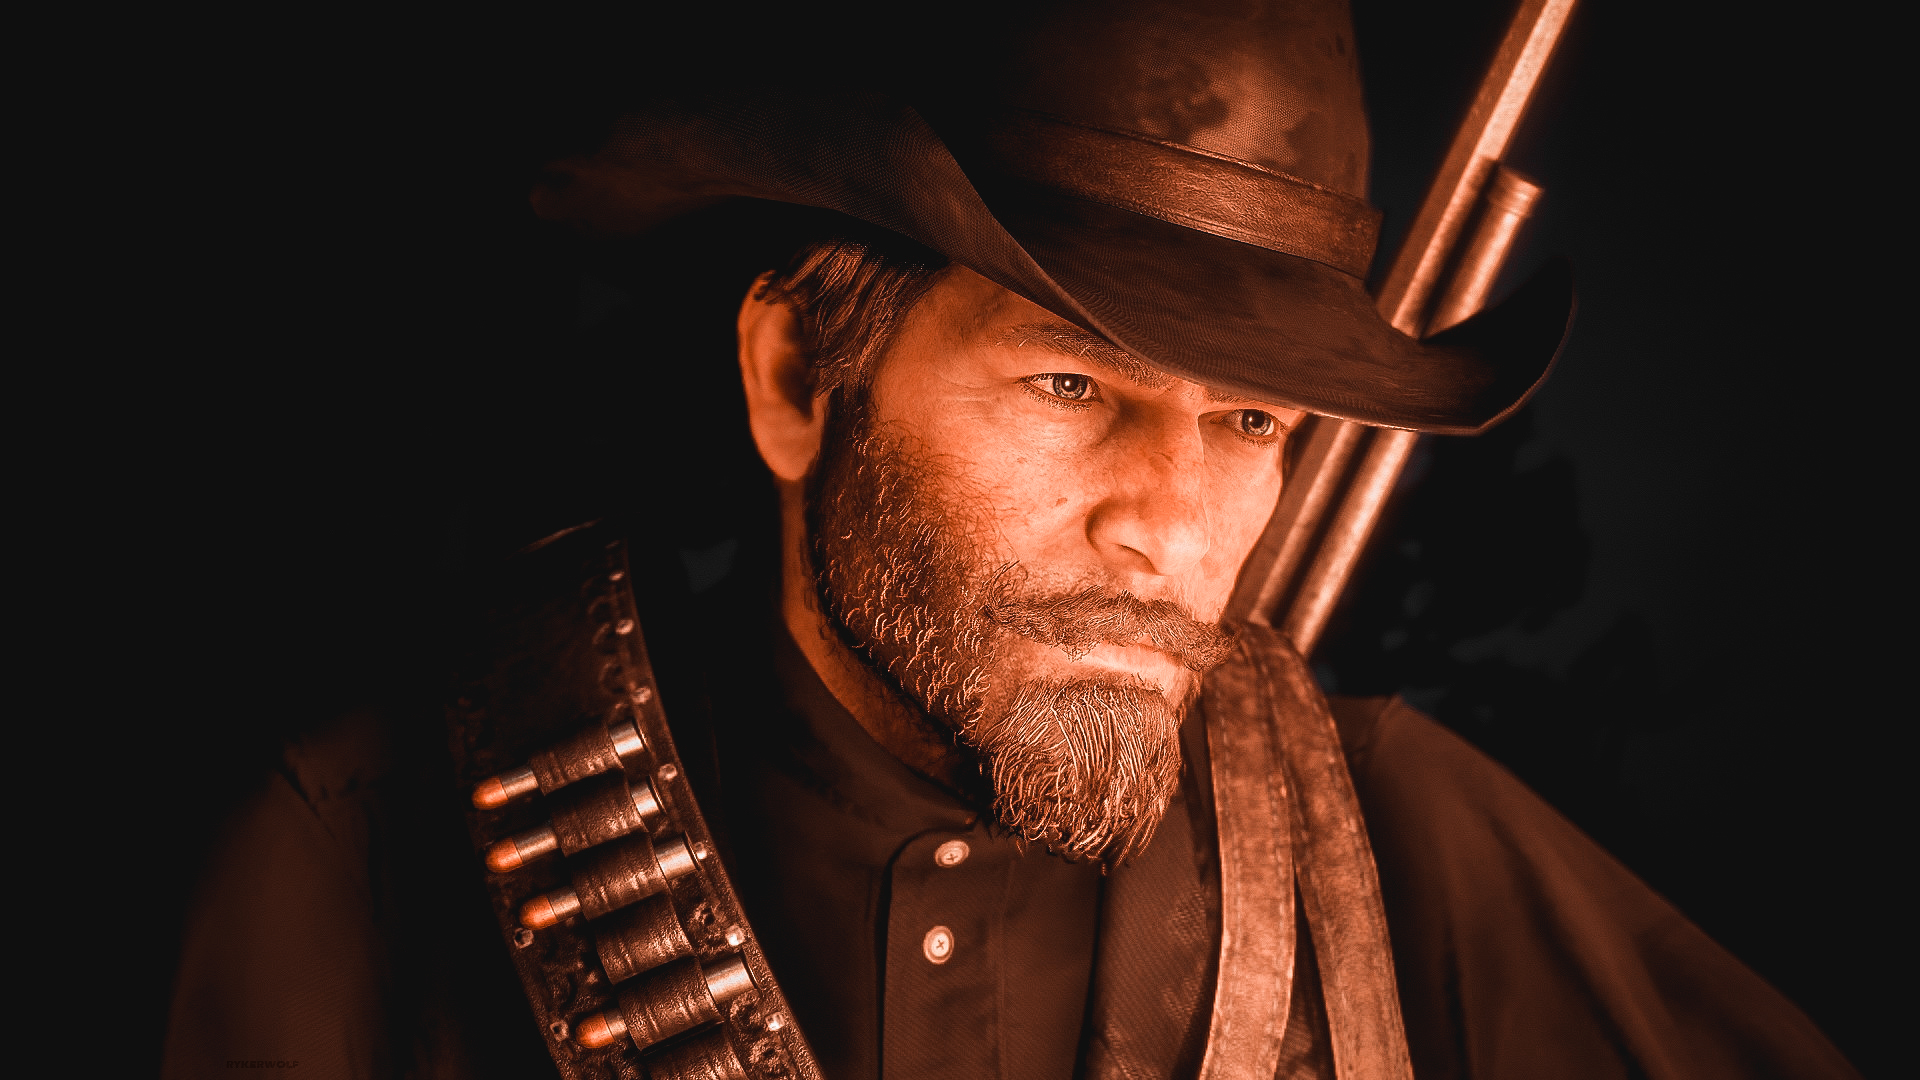 General 1920x1080 Red Dead Redemption 2 Arthur Morgan Rockstar Games video games Red Dead Redemption video game characters CGI beard hat